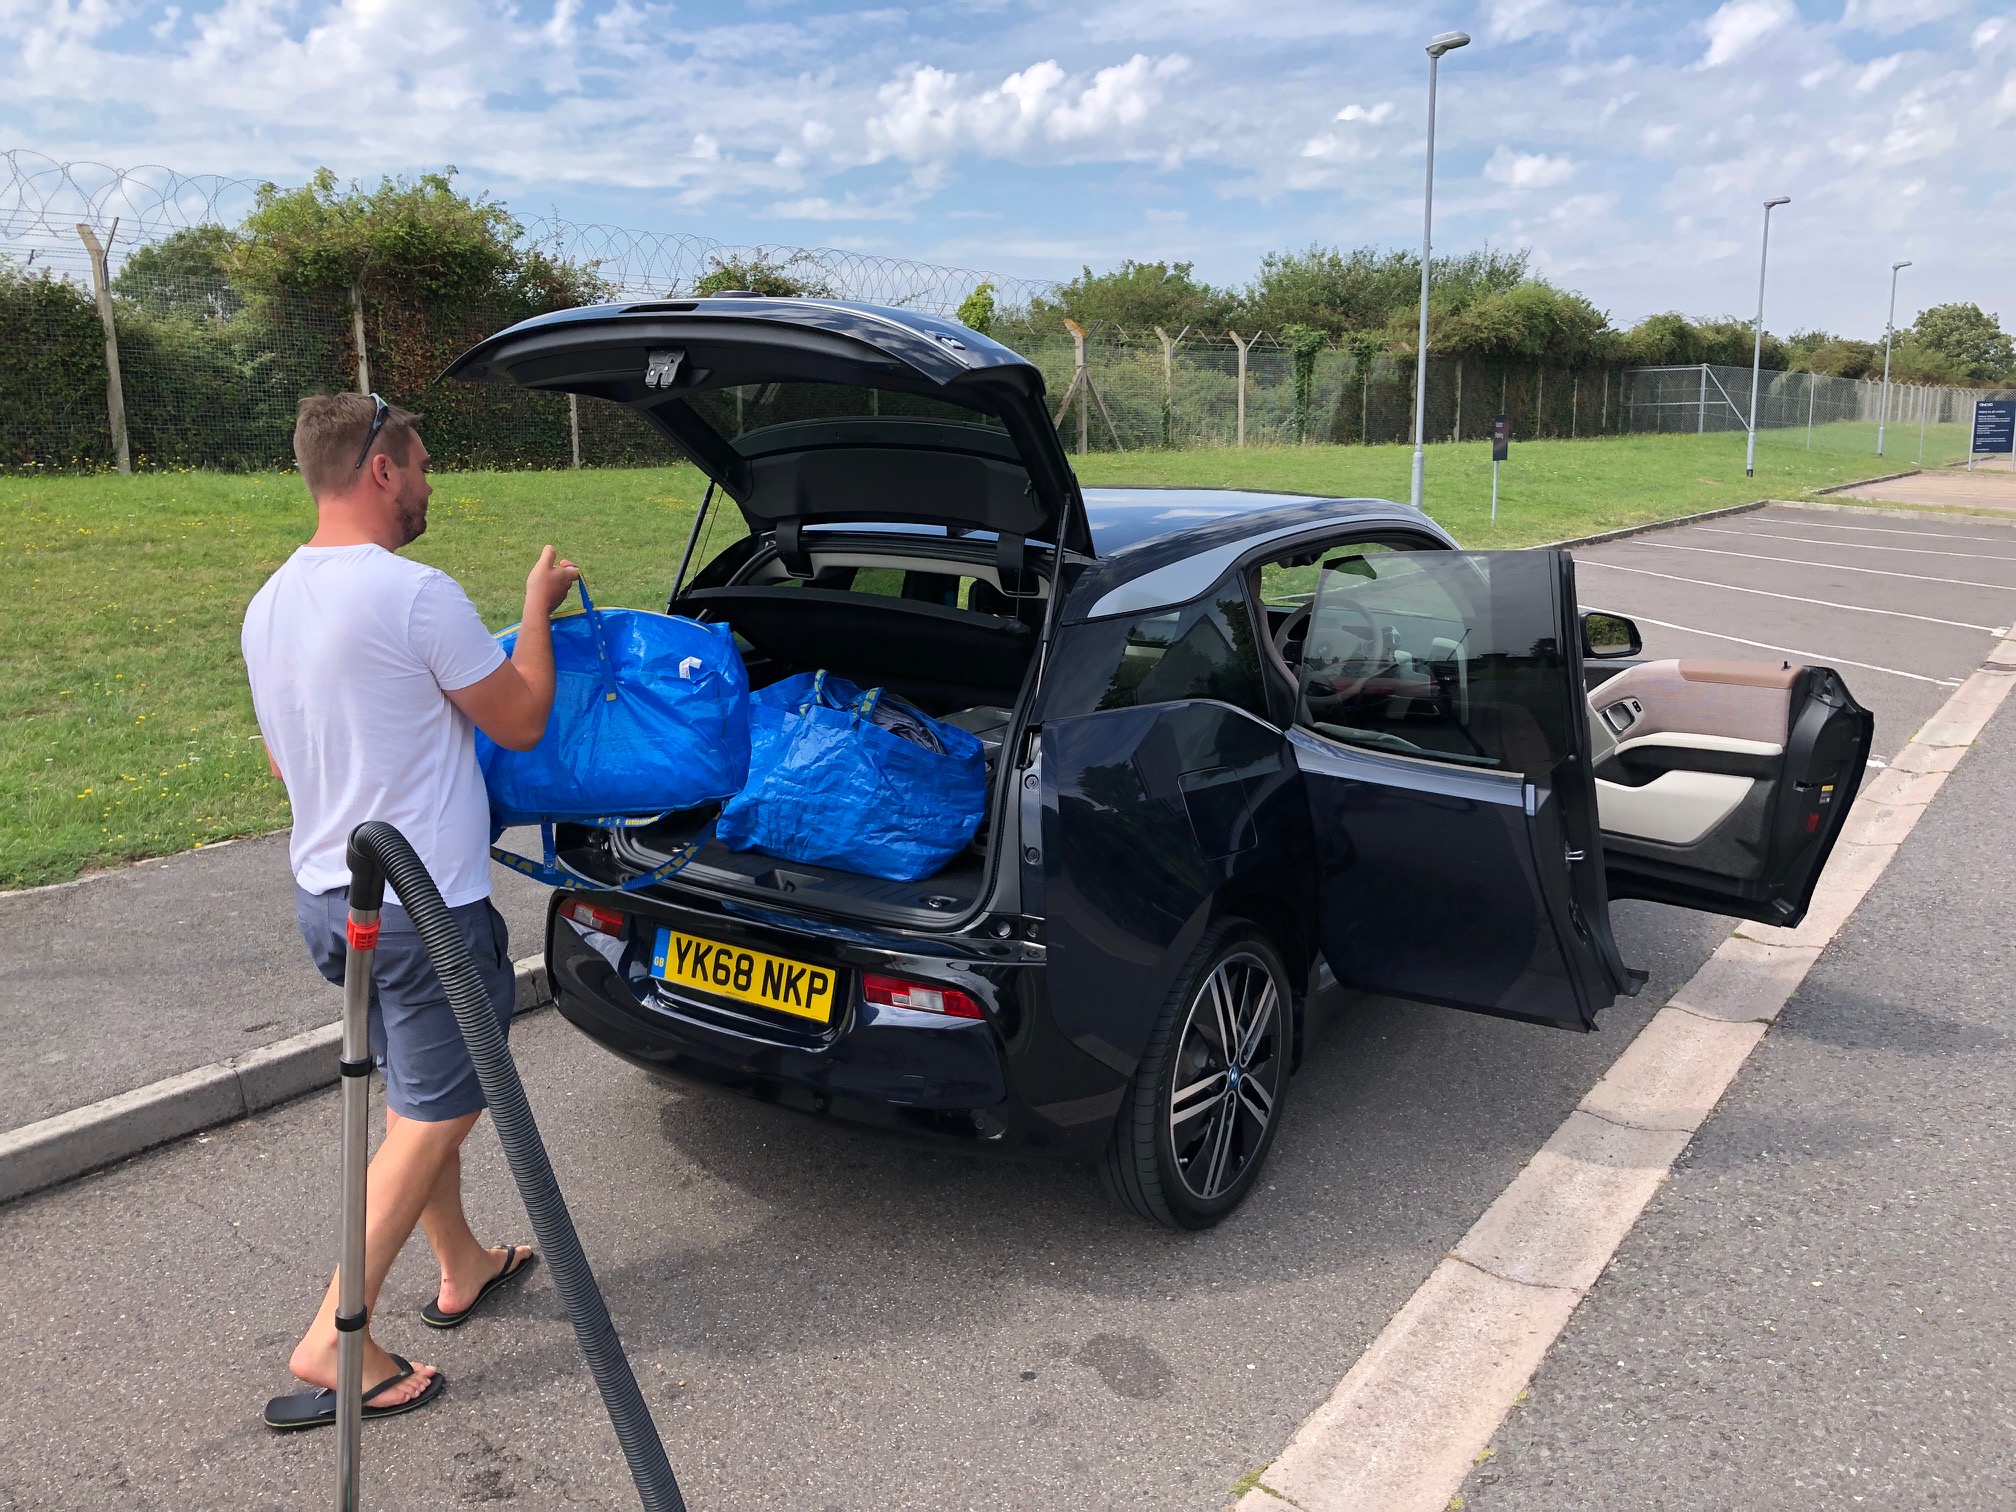 The i3 is an easy car to load up with luggage